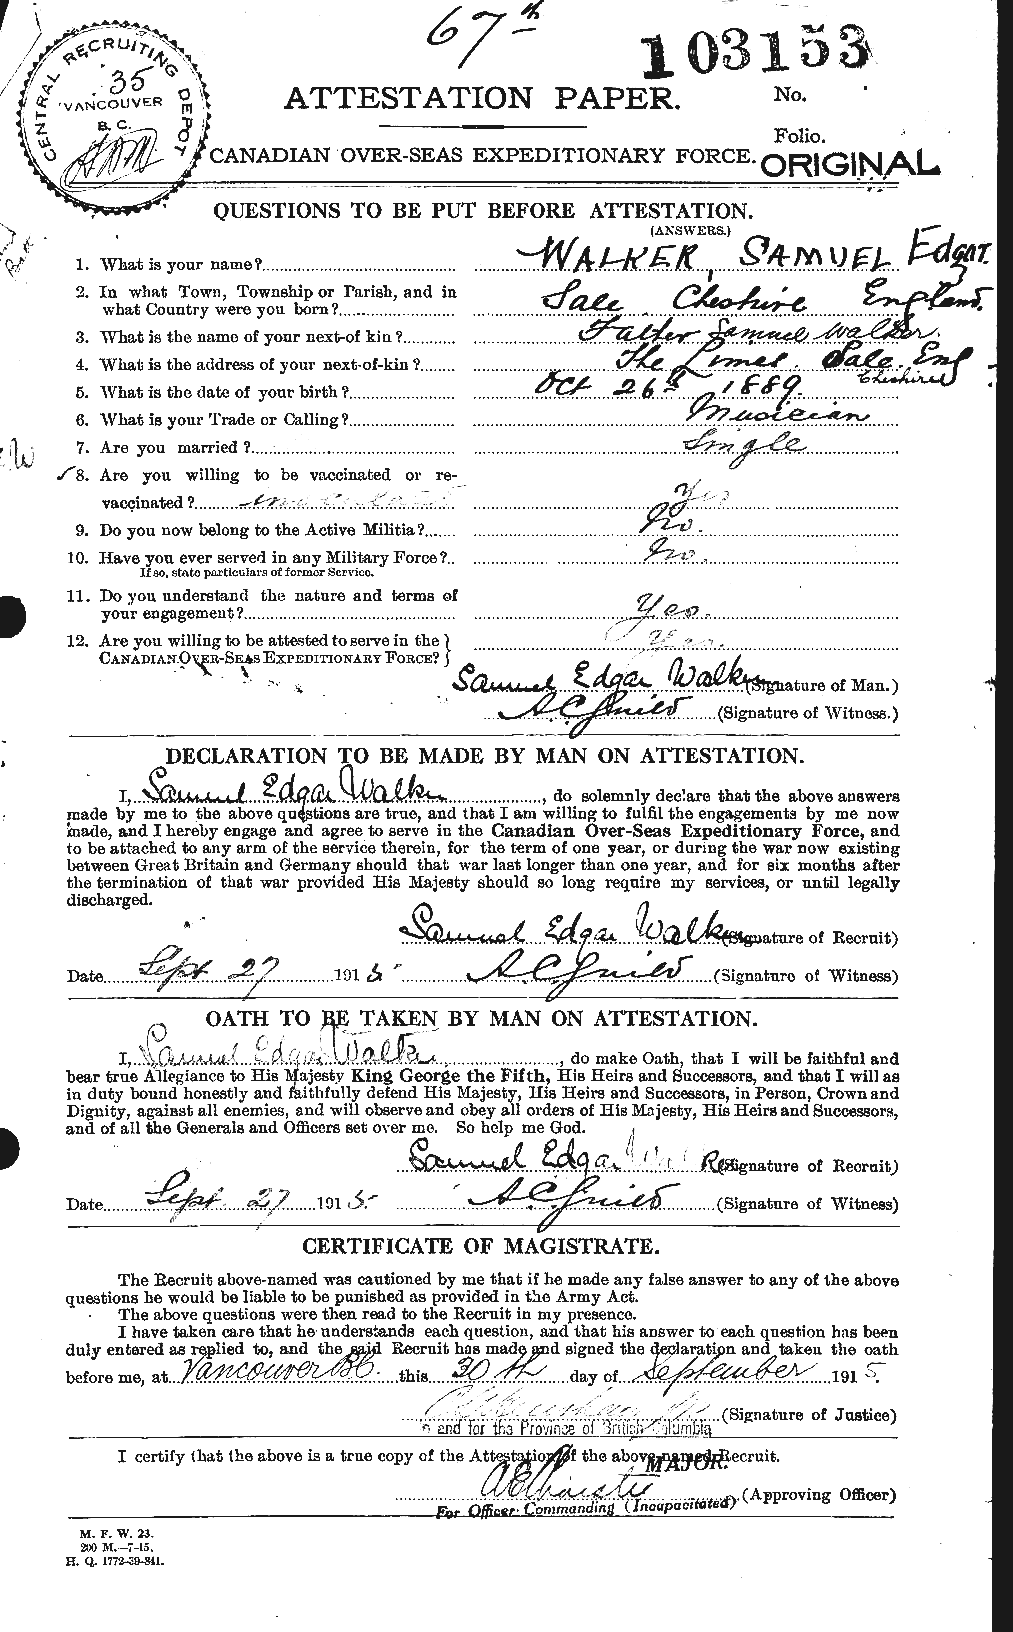 Personnel Records of the First World War - CEF 655763a